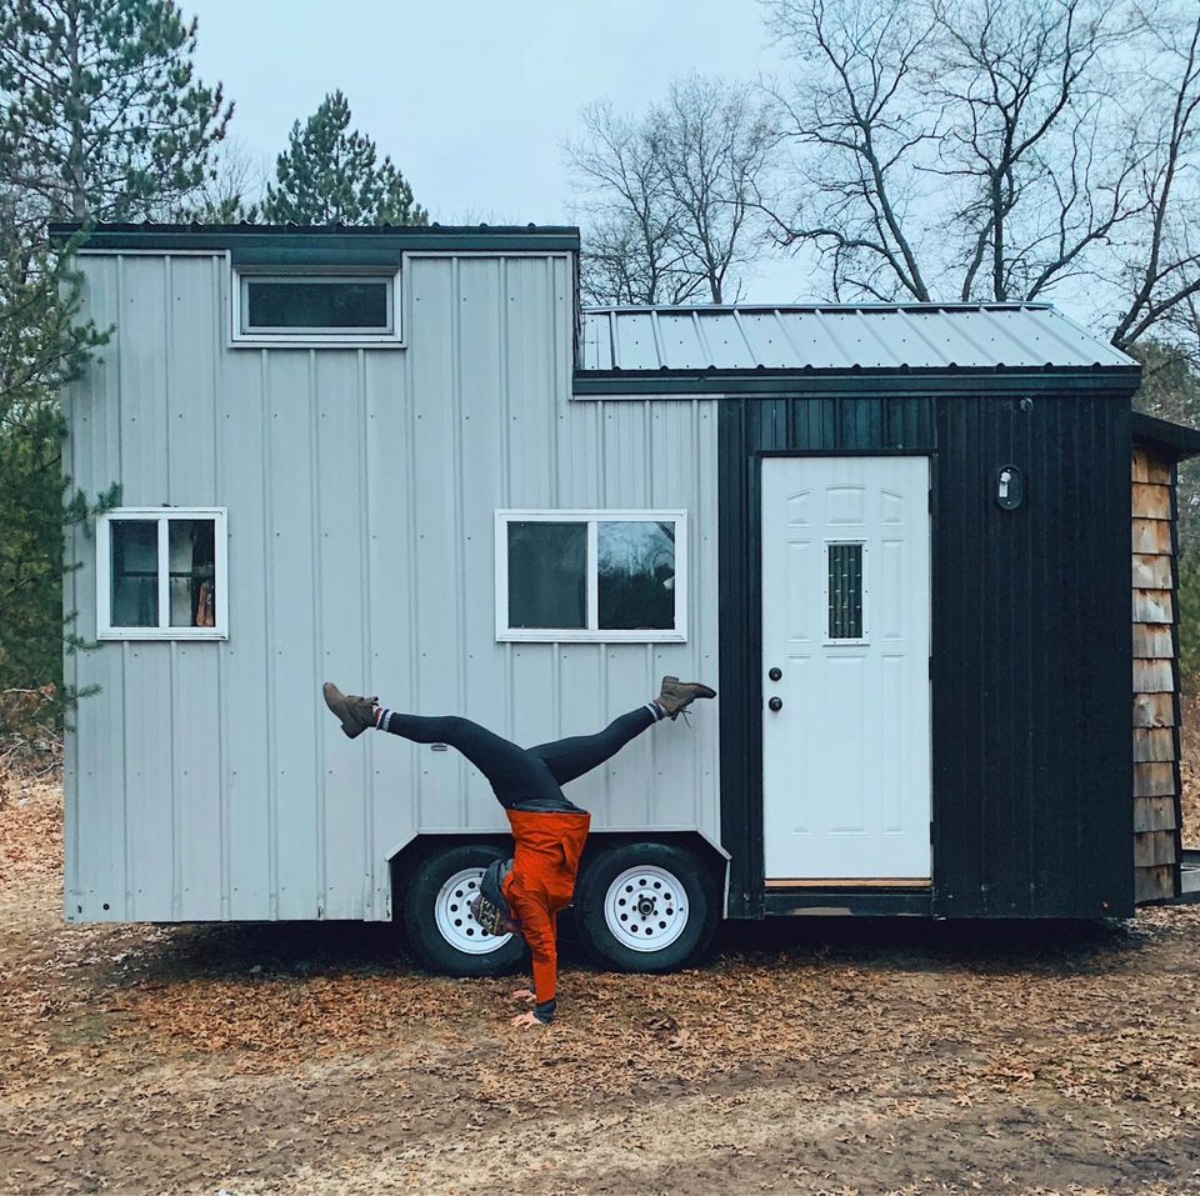 Main entrance of 180 sf Adorable Tiny House on Wheels from outside